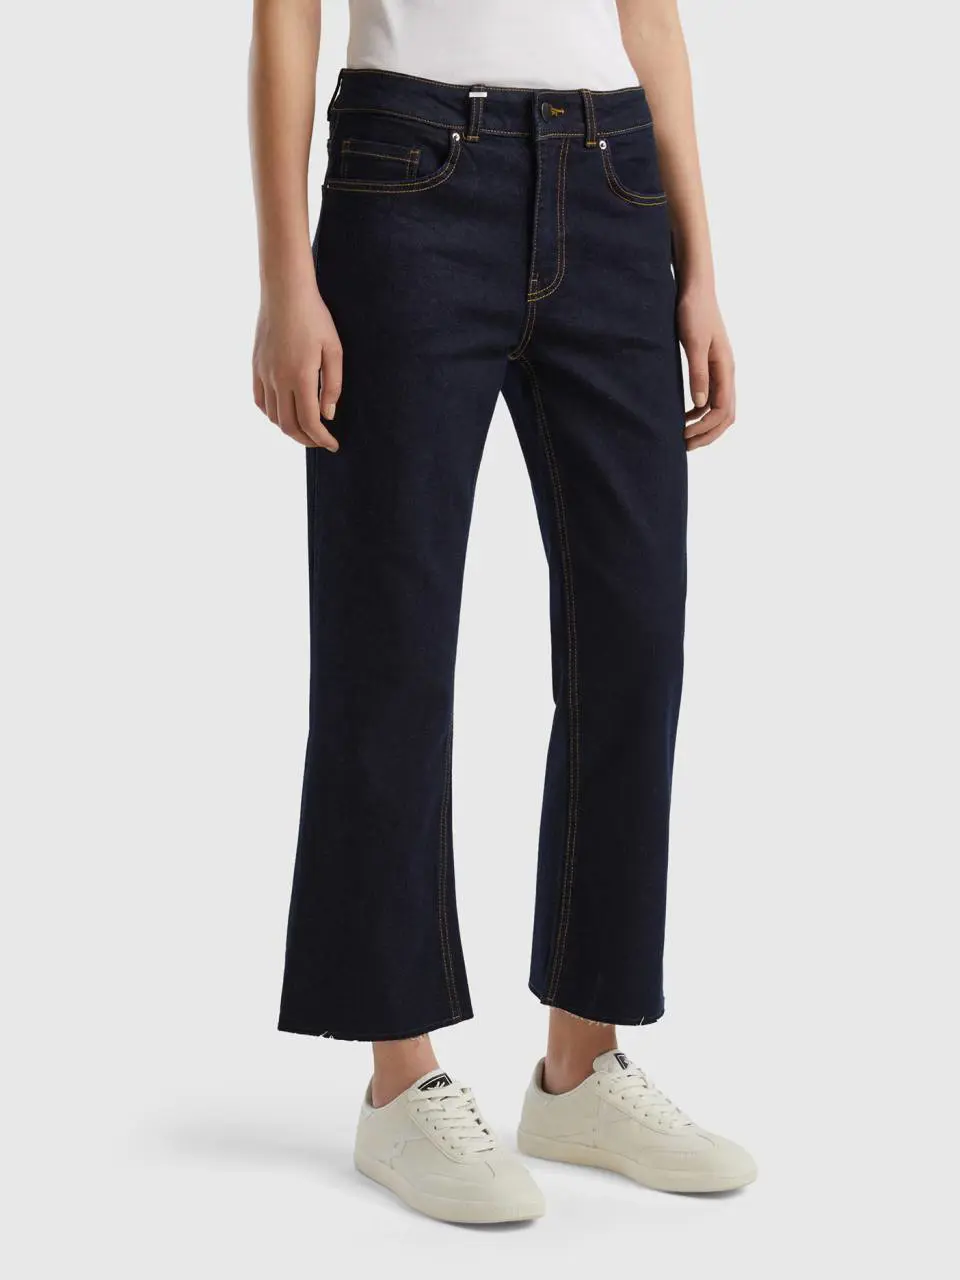 Benetton cropped jeans in recycled cotton. 1